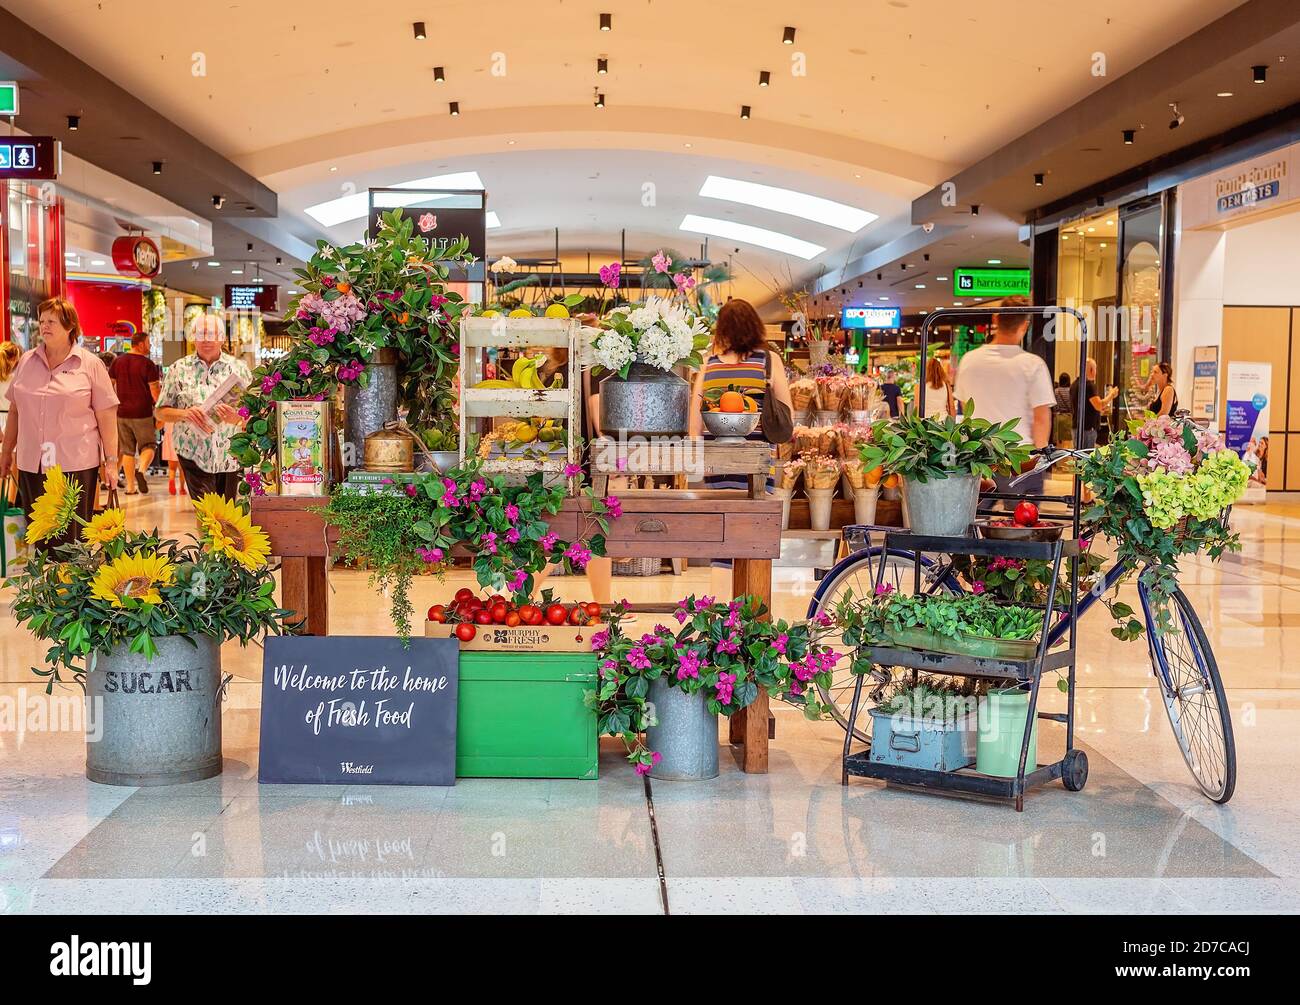 Brisbane, Queensland, Australia - 28th September 2019: A small florist retailer at Carindale Shoppping Centre Stock Photo